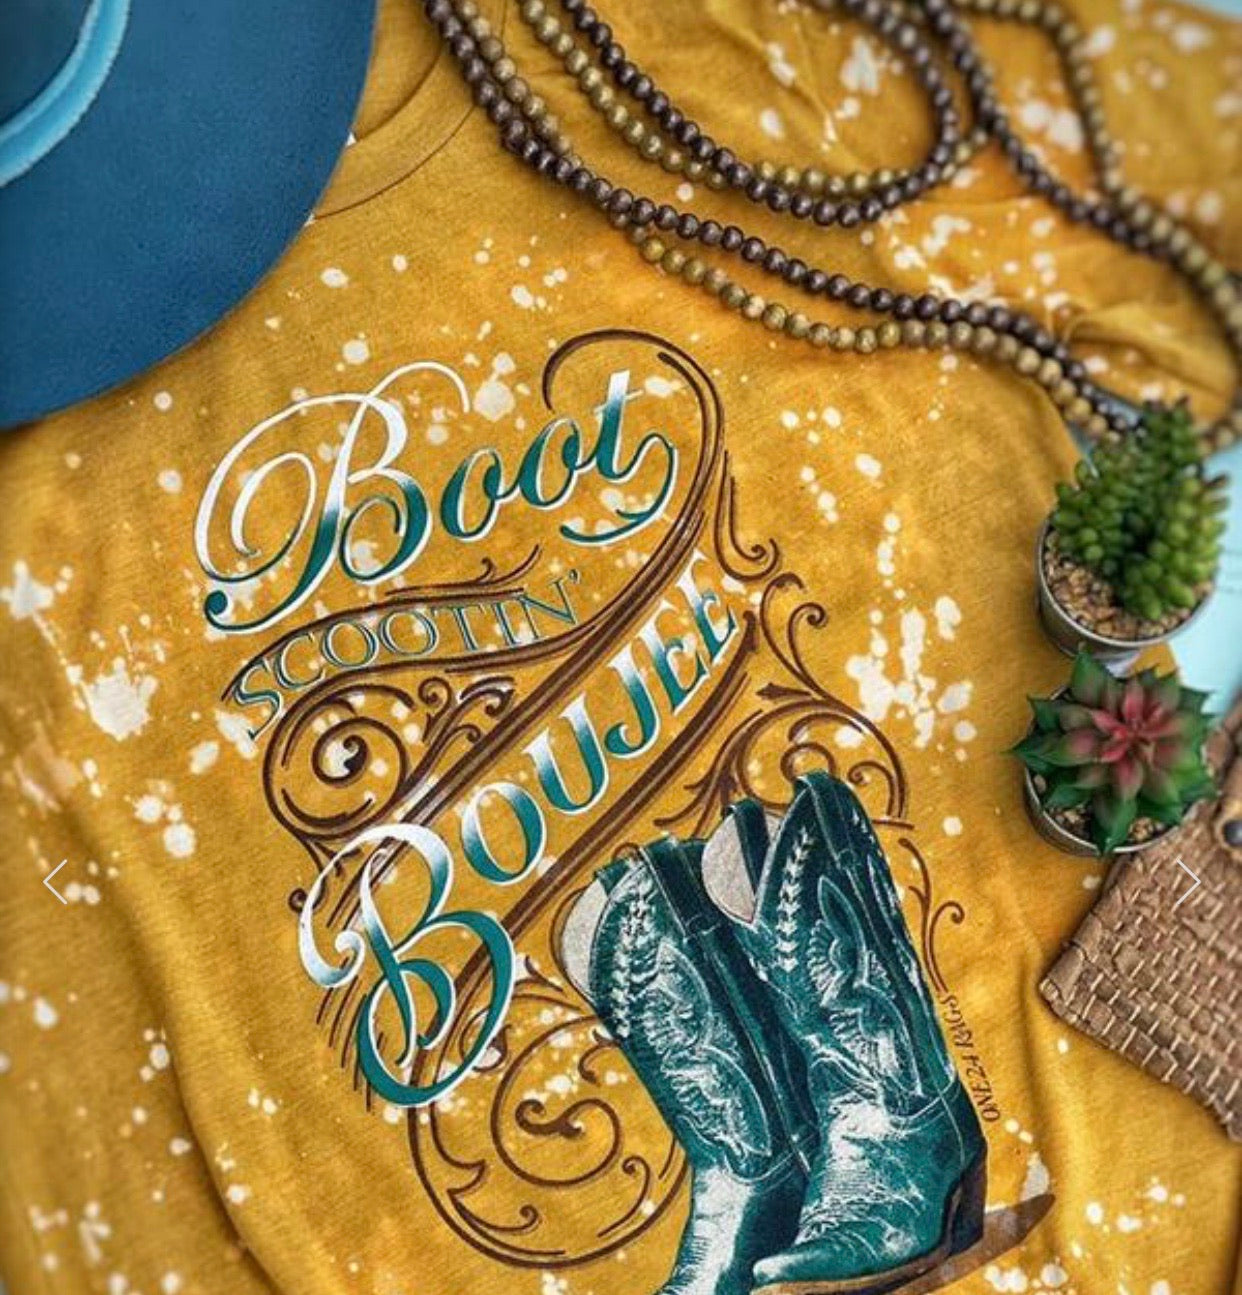 Boot Scootin’ Boujee T-shirts